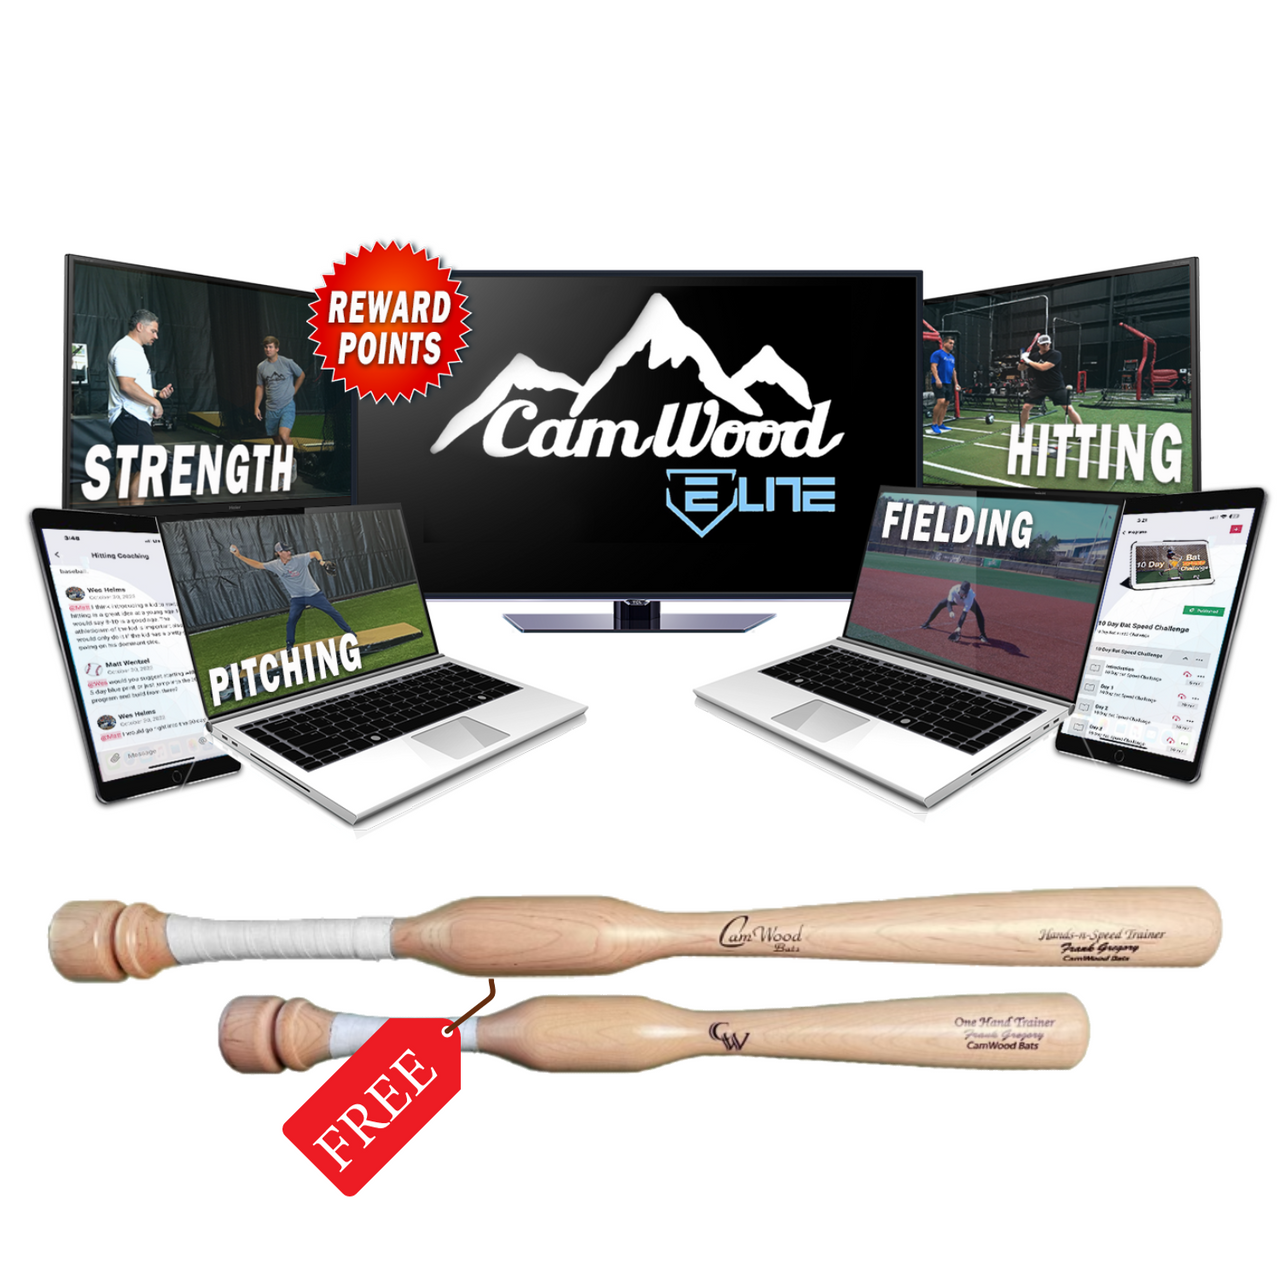 CamWood Elite Subscription + FREE Hands & Speed Trainer & One Hand Trainer